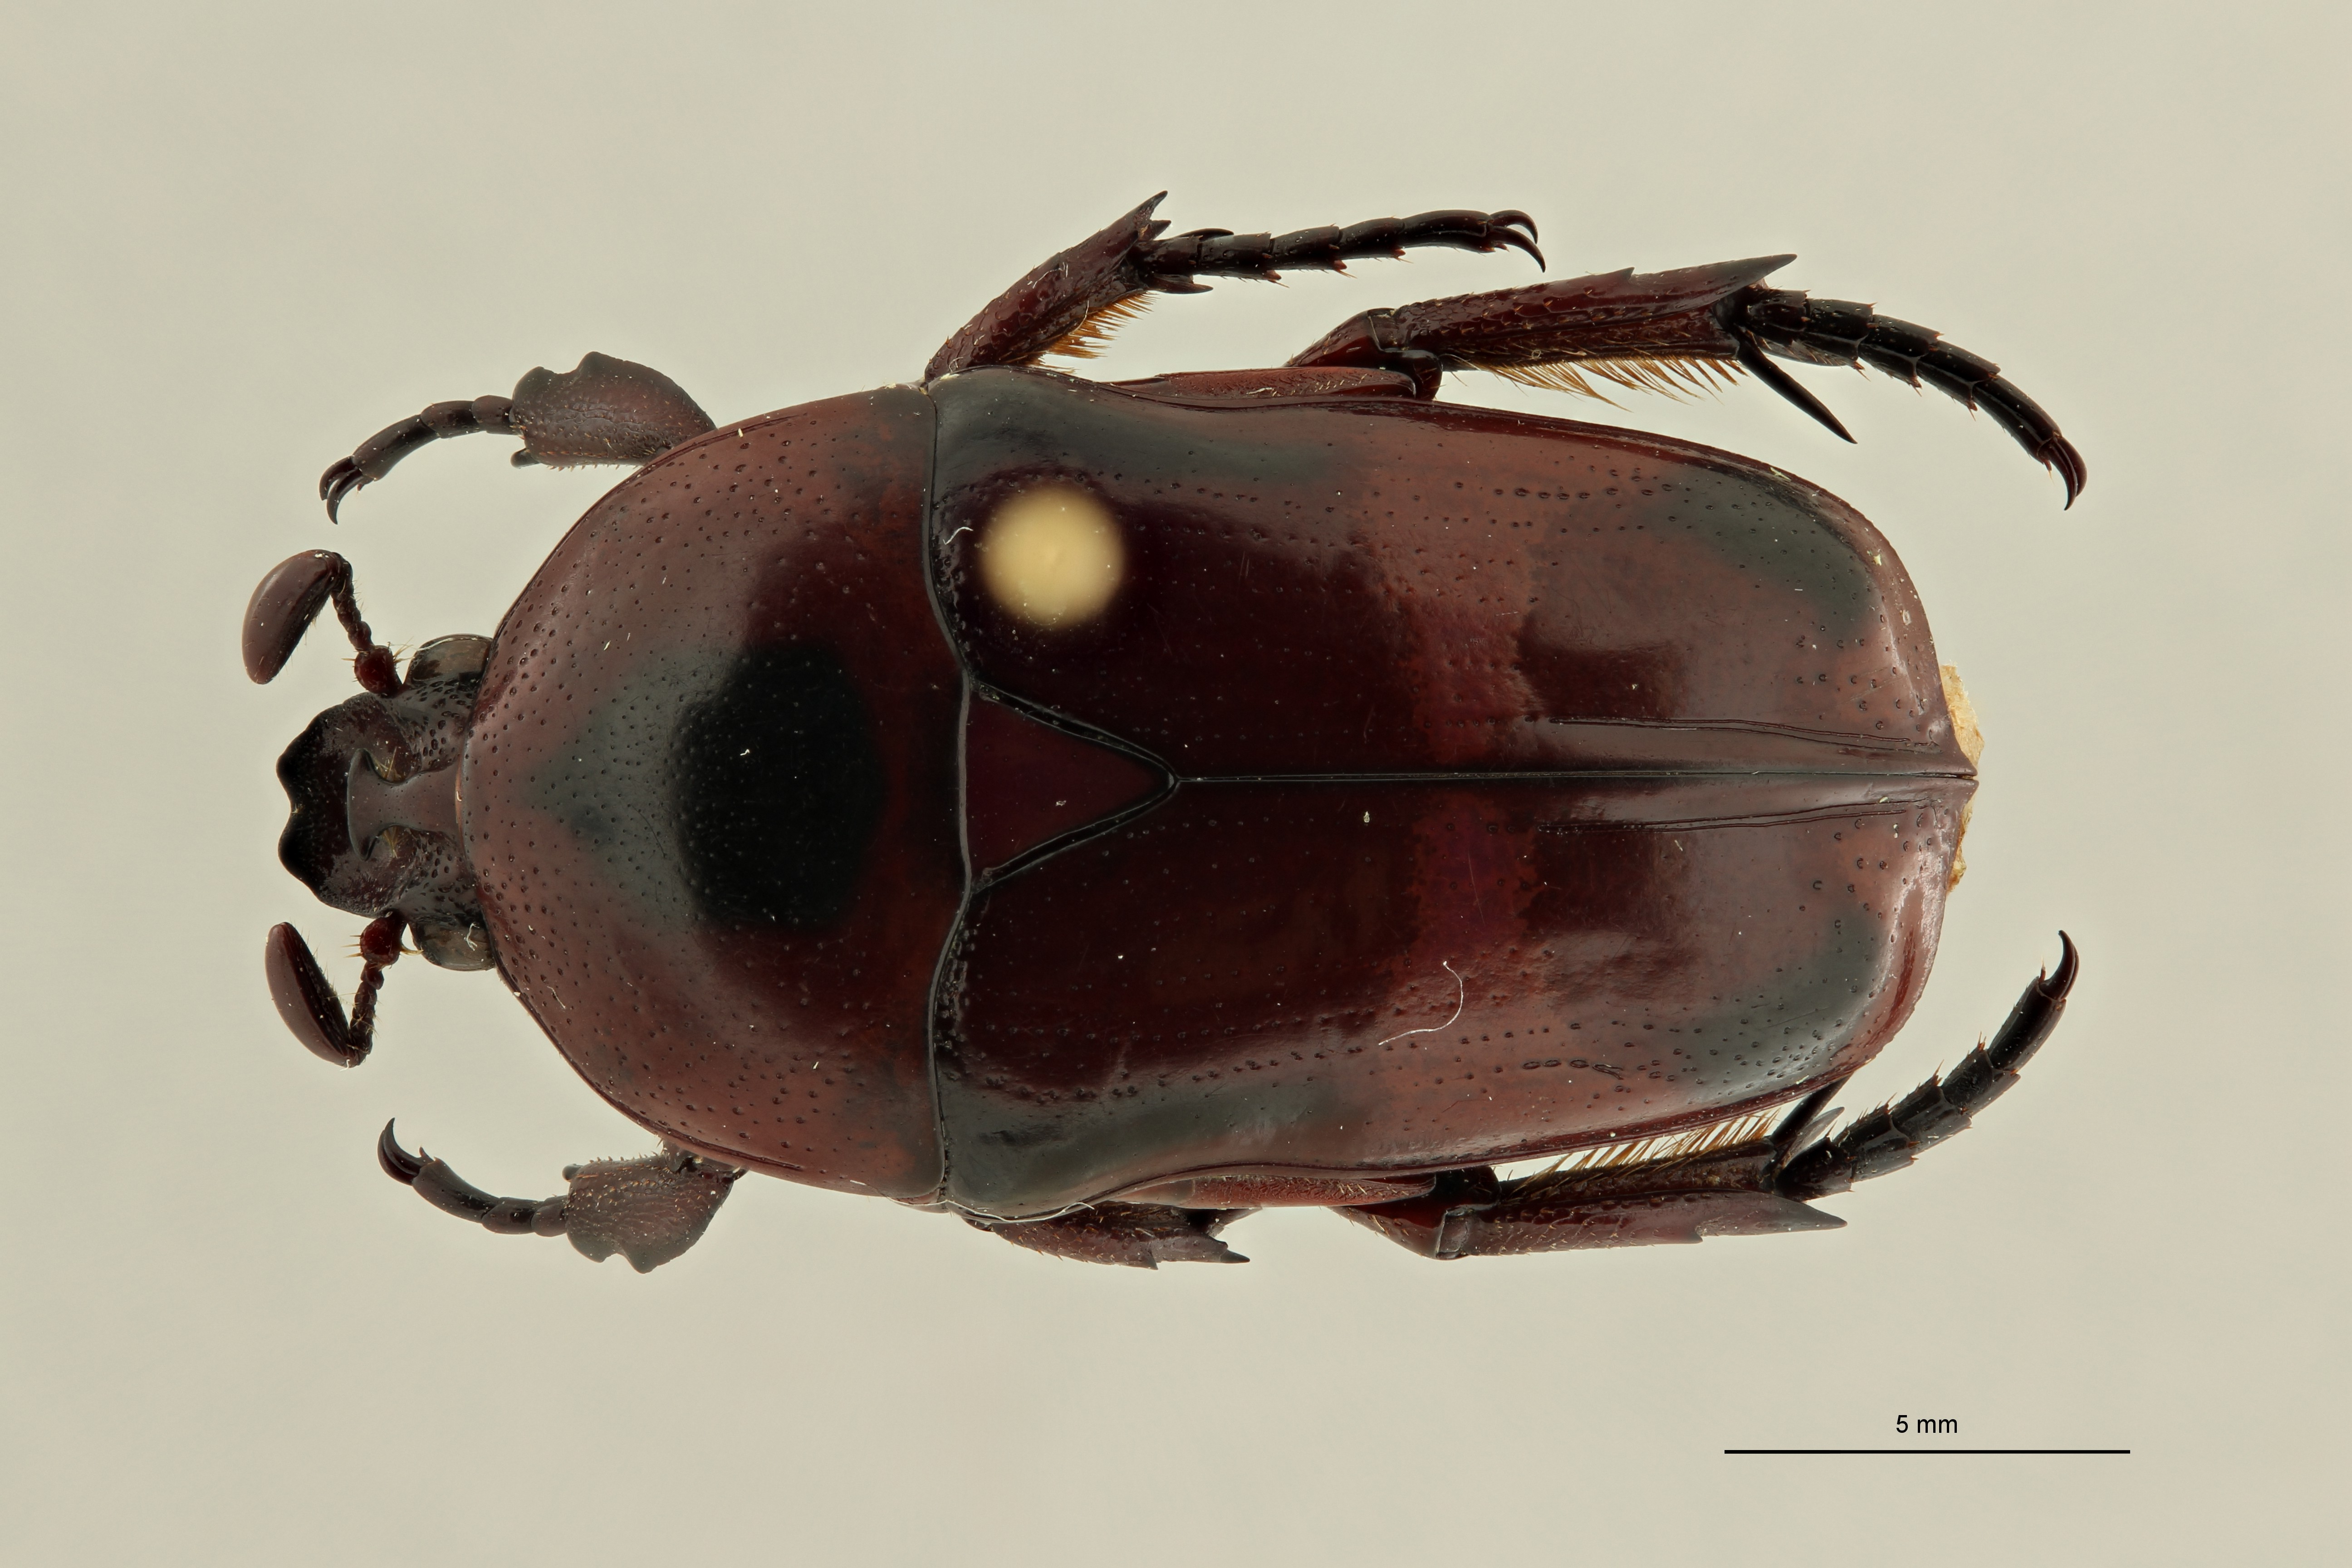 Neomystroceros widagdoi at D ZS PMax Scaled.jpeg